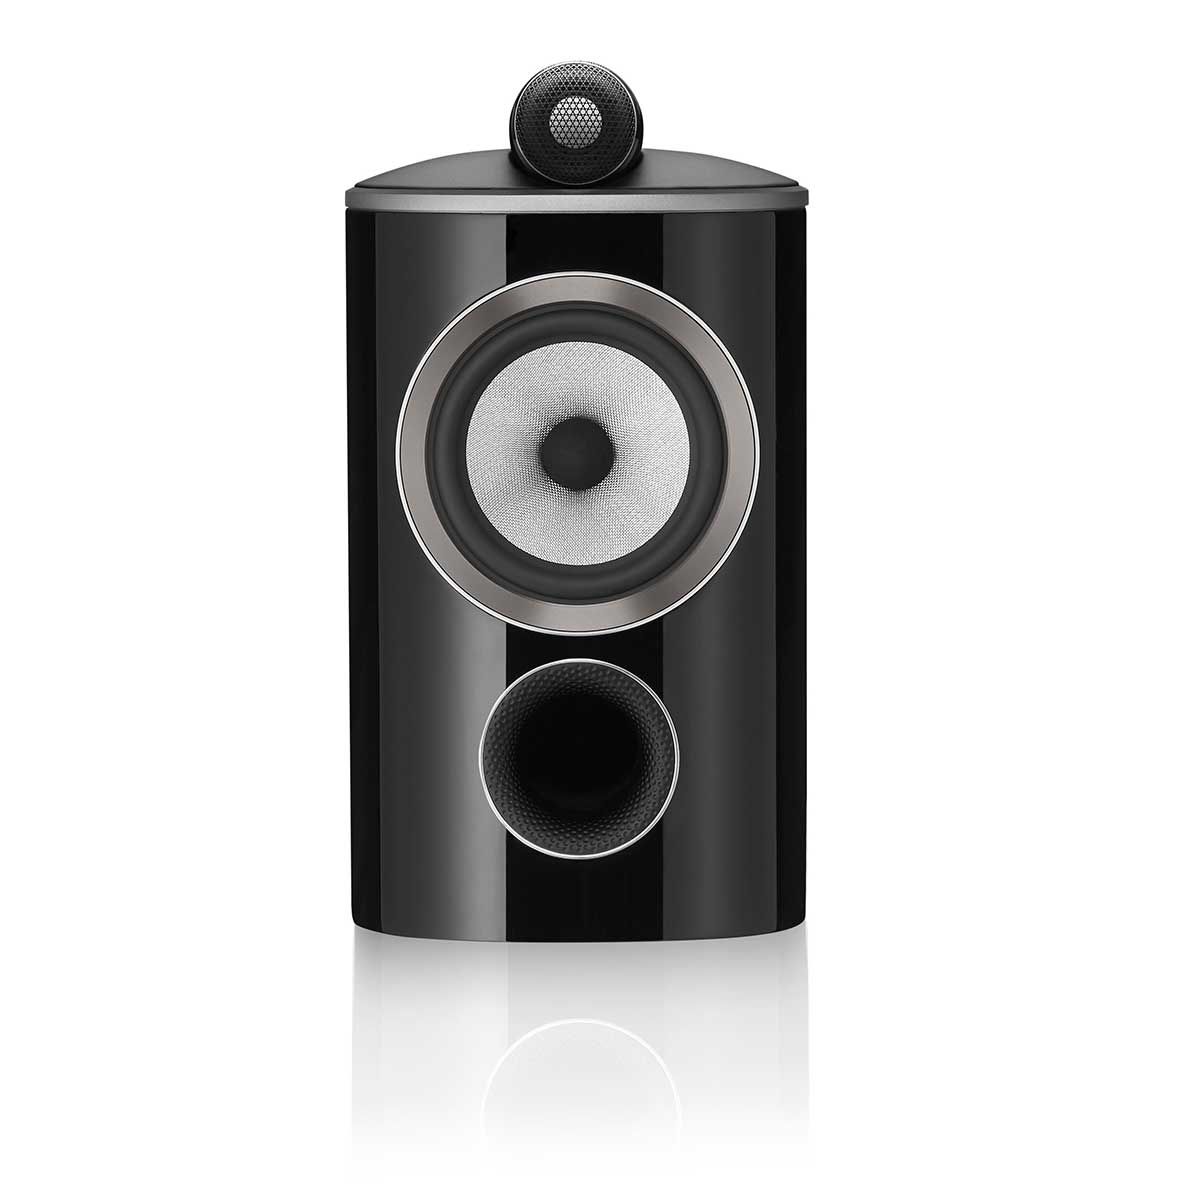 Bowers & Wilkins 805 D4 Bookshelf Speaker, Gloss Black, front view without grille